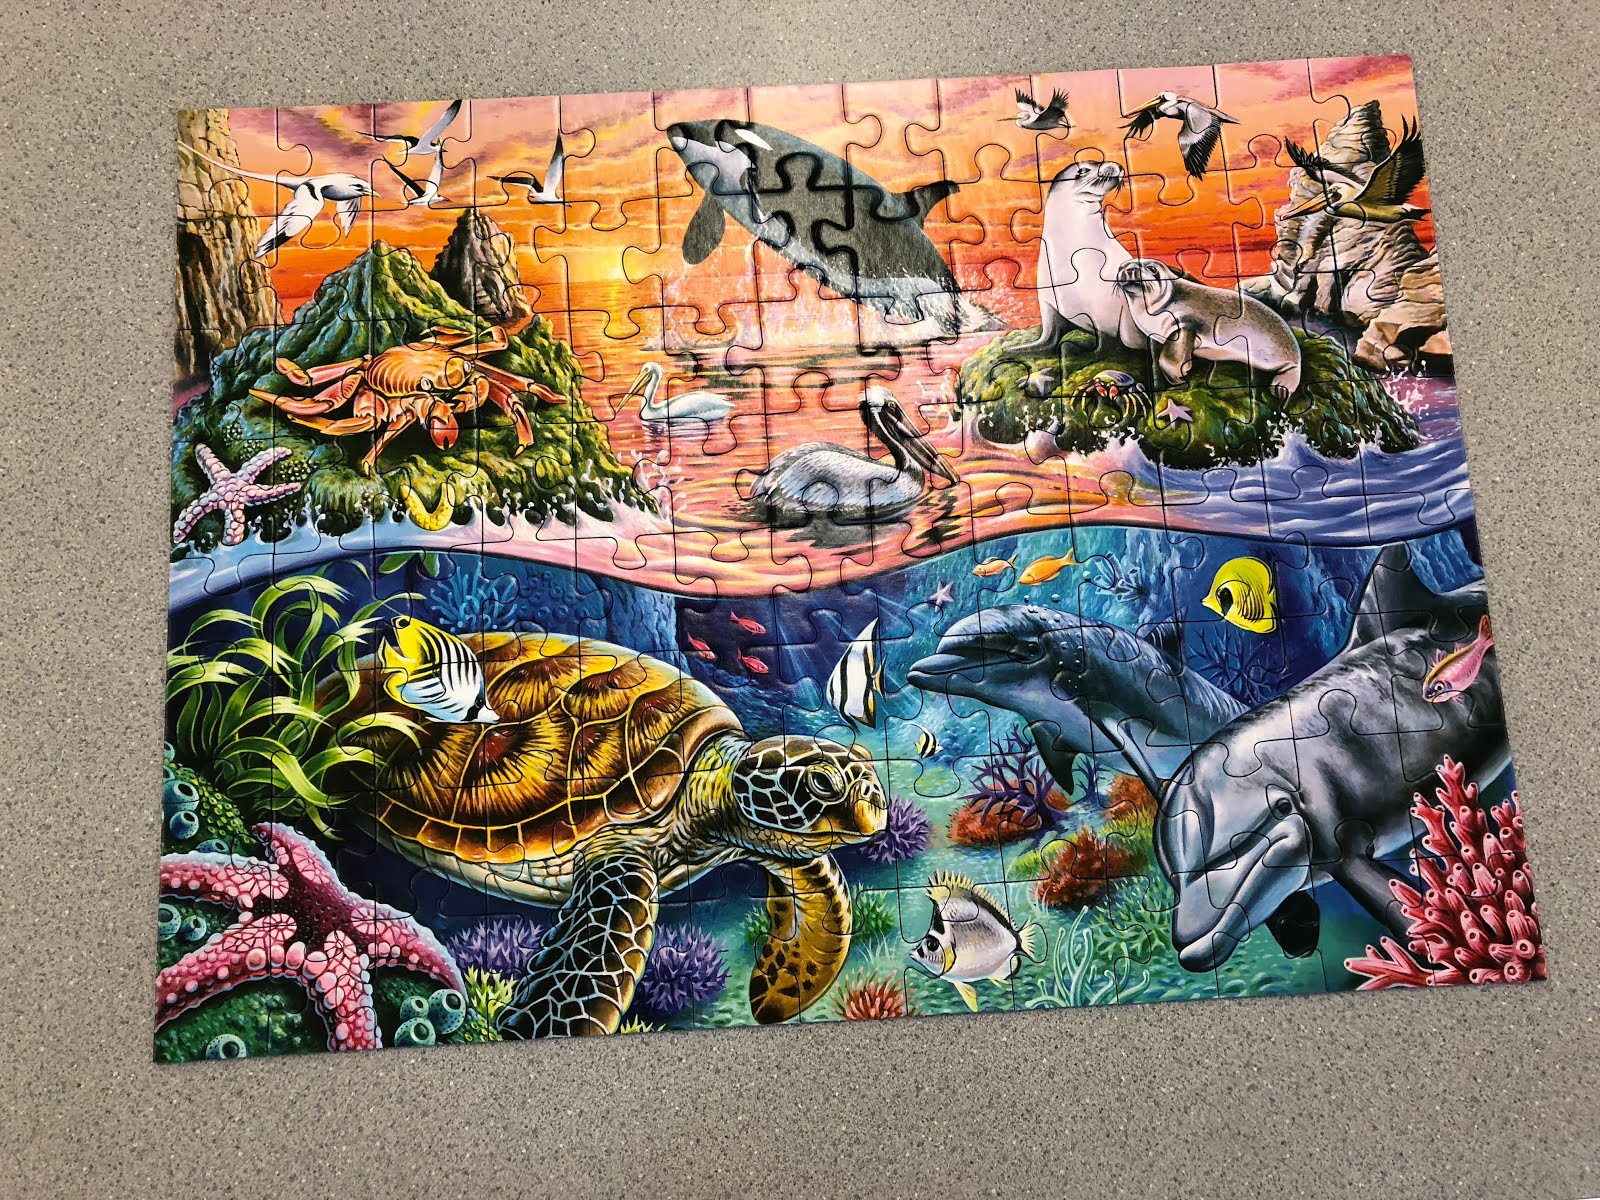 We finished another 100 piece puzzle